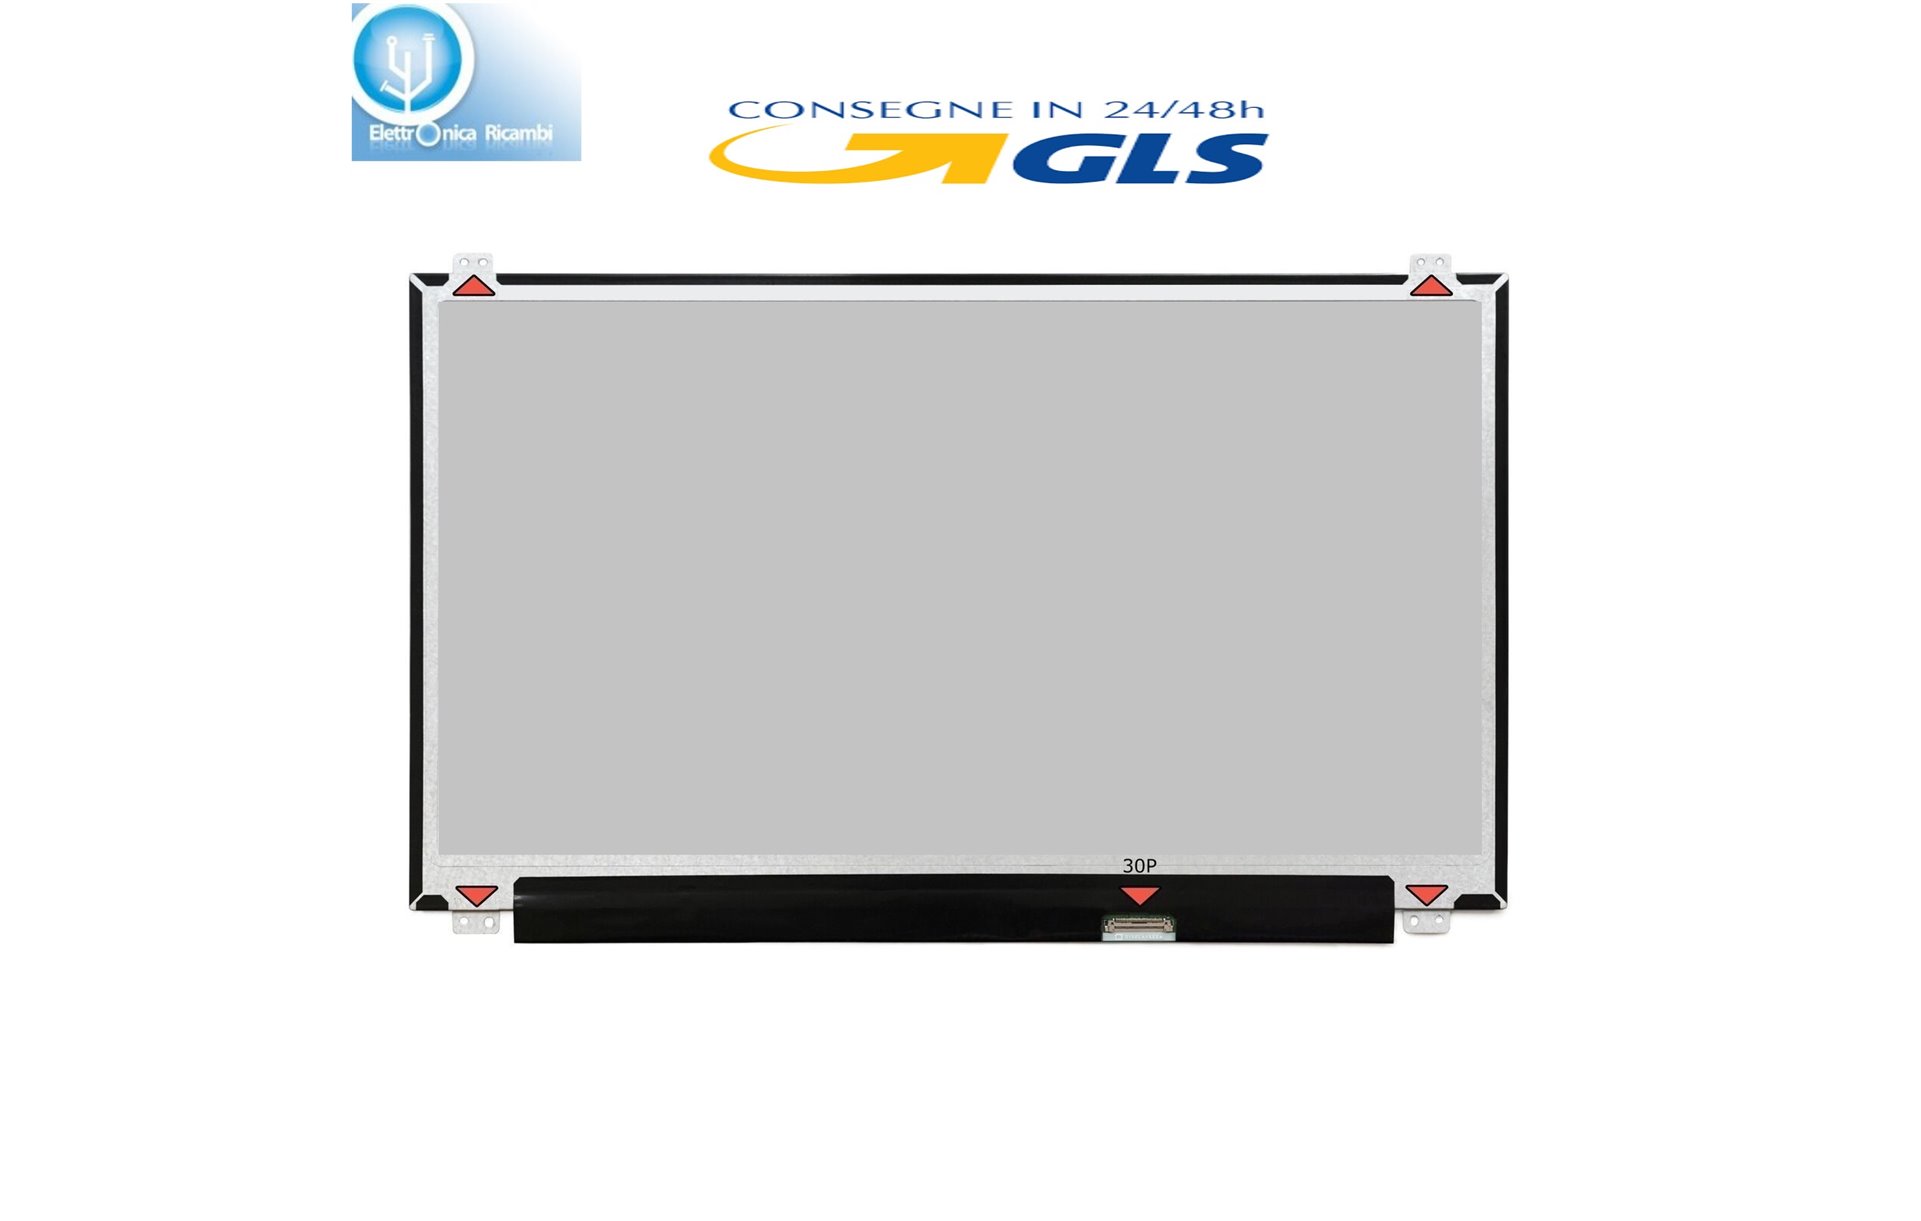 DISPLAY LCD Toshiba SATELLITE PRO PS56HE PS56HC PS56JE PS575E PS57B PS57D PS57E PS57H PS58 SERIES 15.6 1920x1080 LED 30 pin